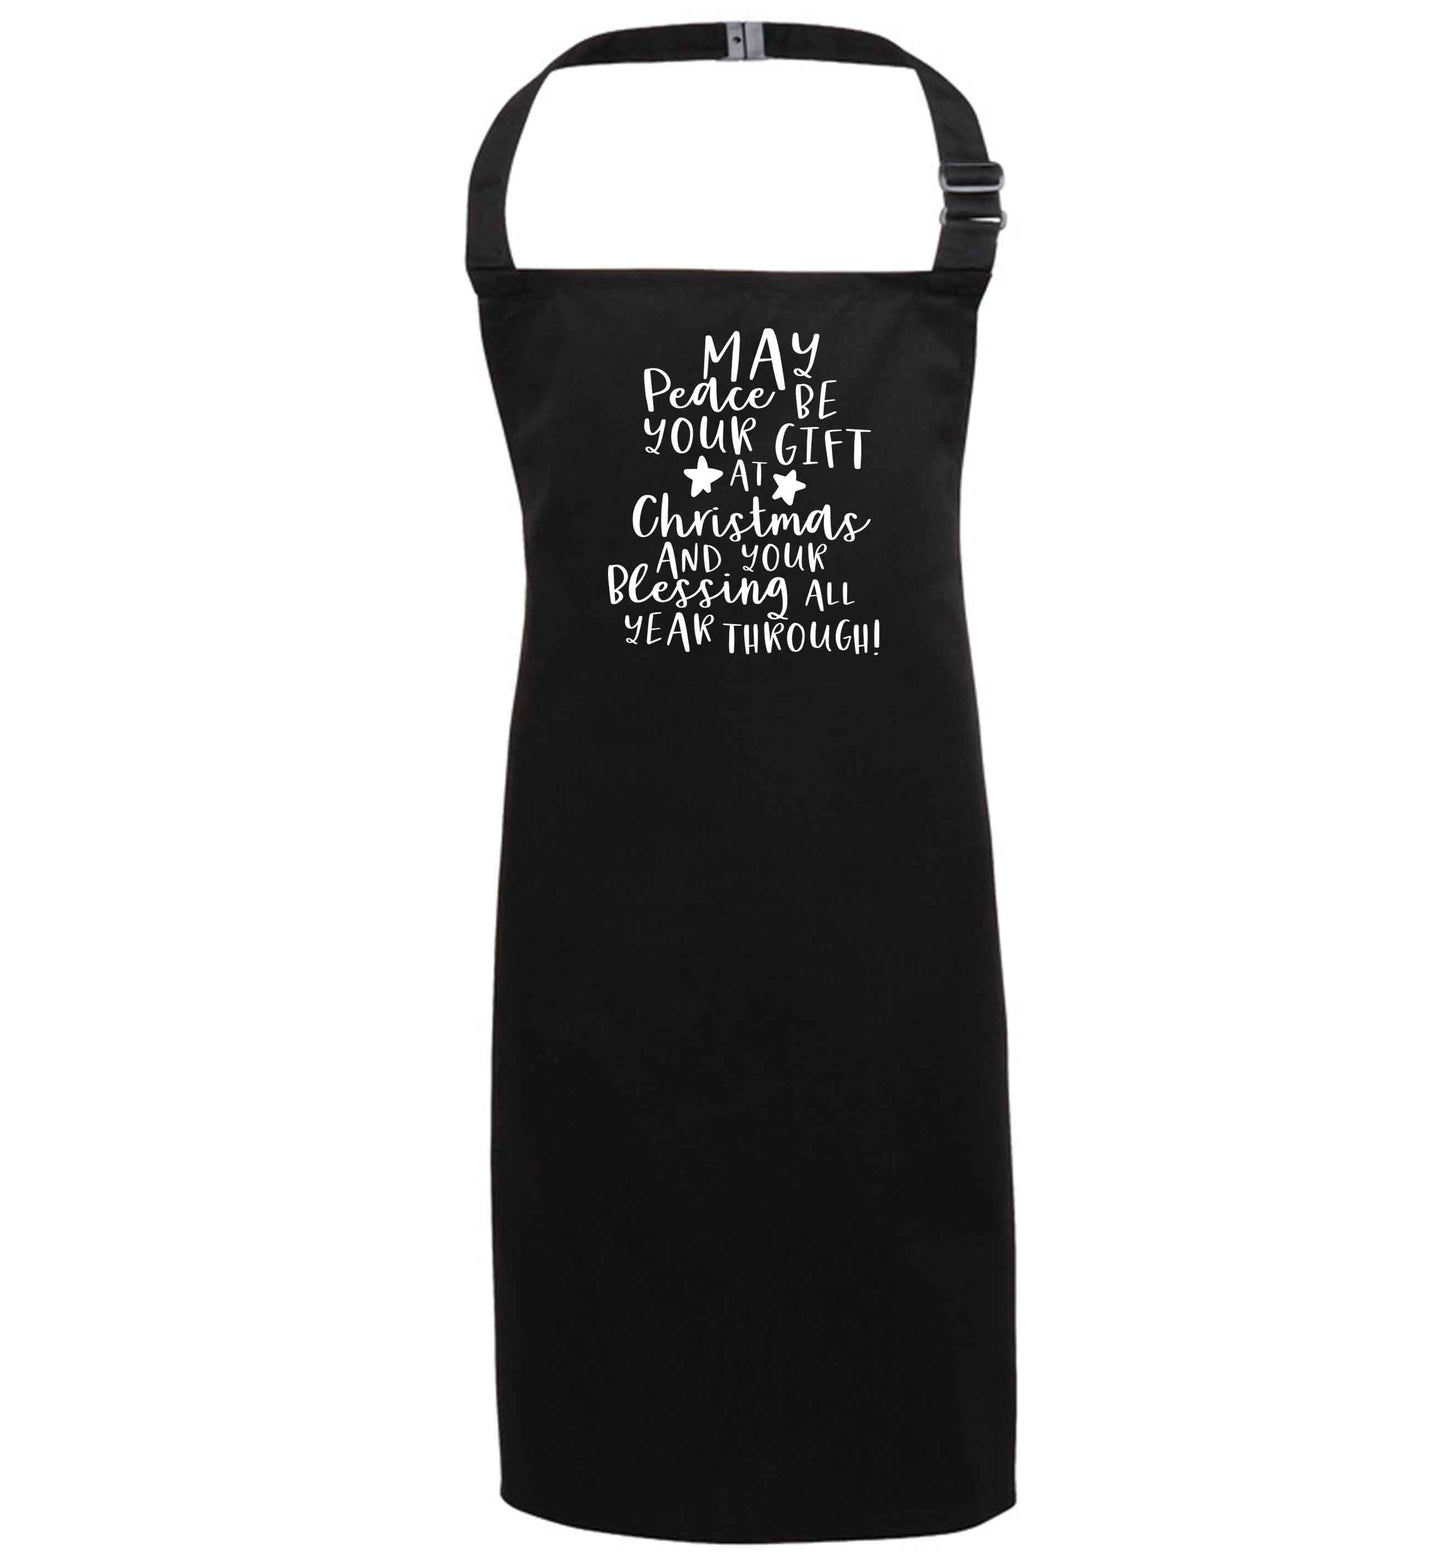 Peace be your Gift at Christmas Gift black apron 7-10 years